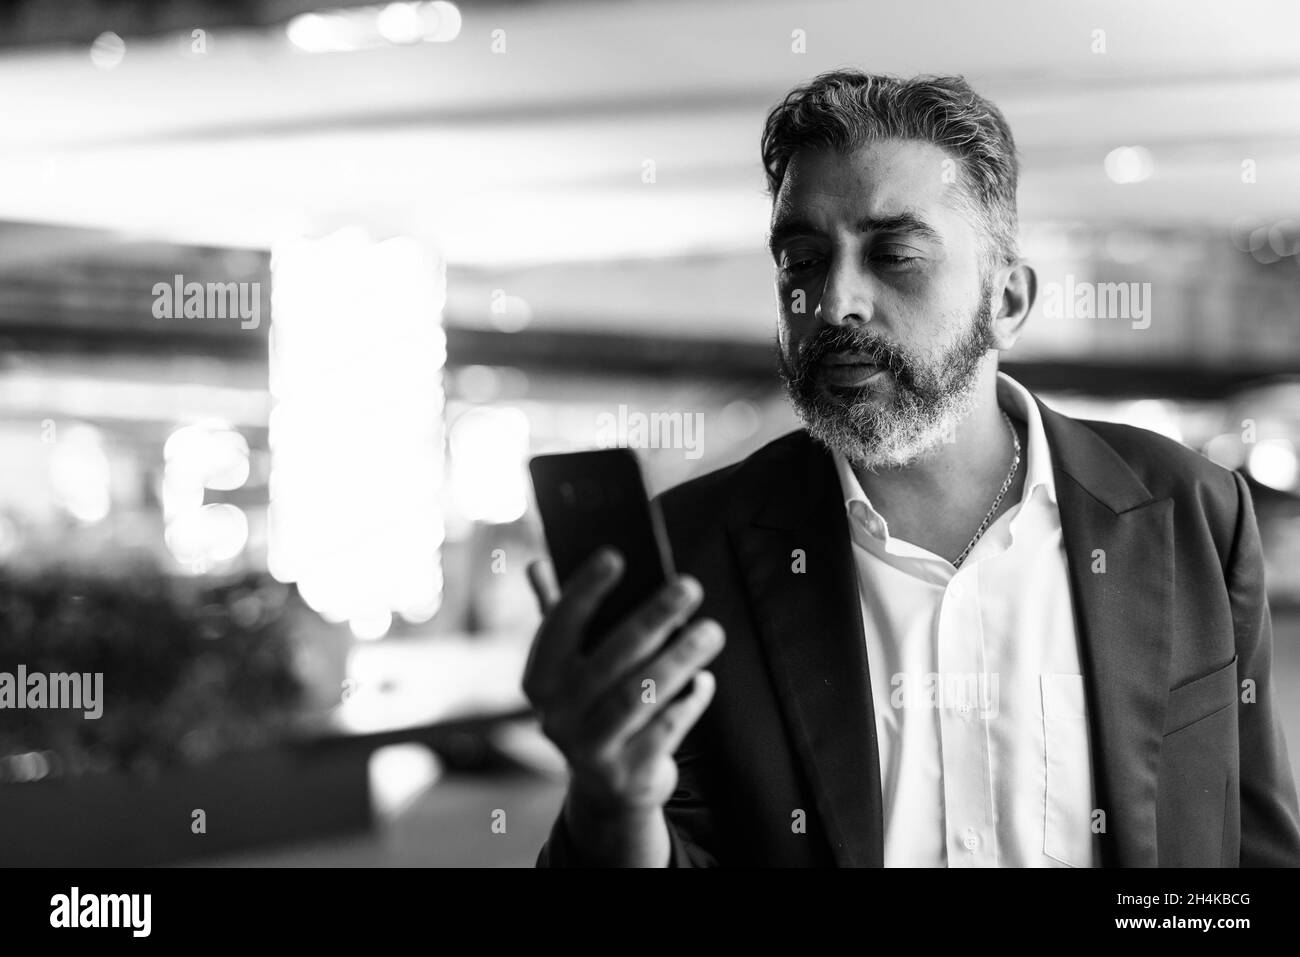 Black and white portrait of handsome Indian businessman in city at night using mobile phone Stock Photo